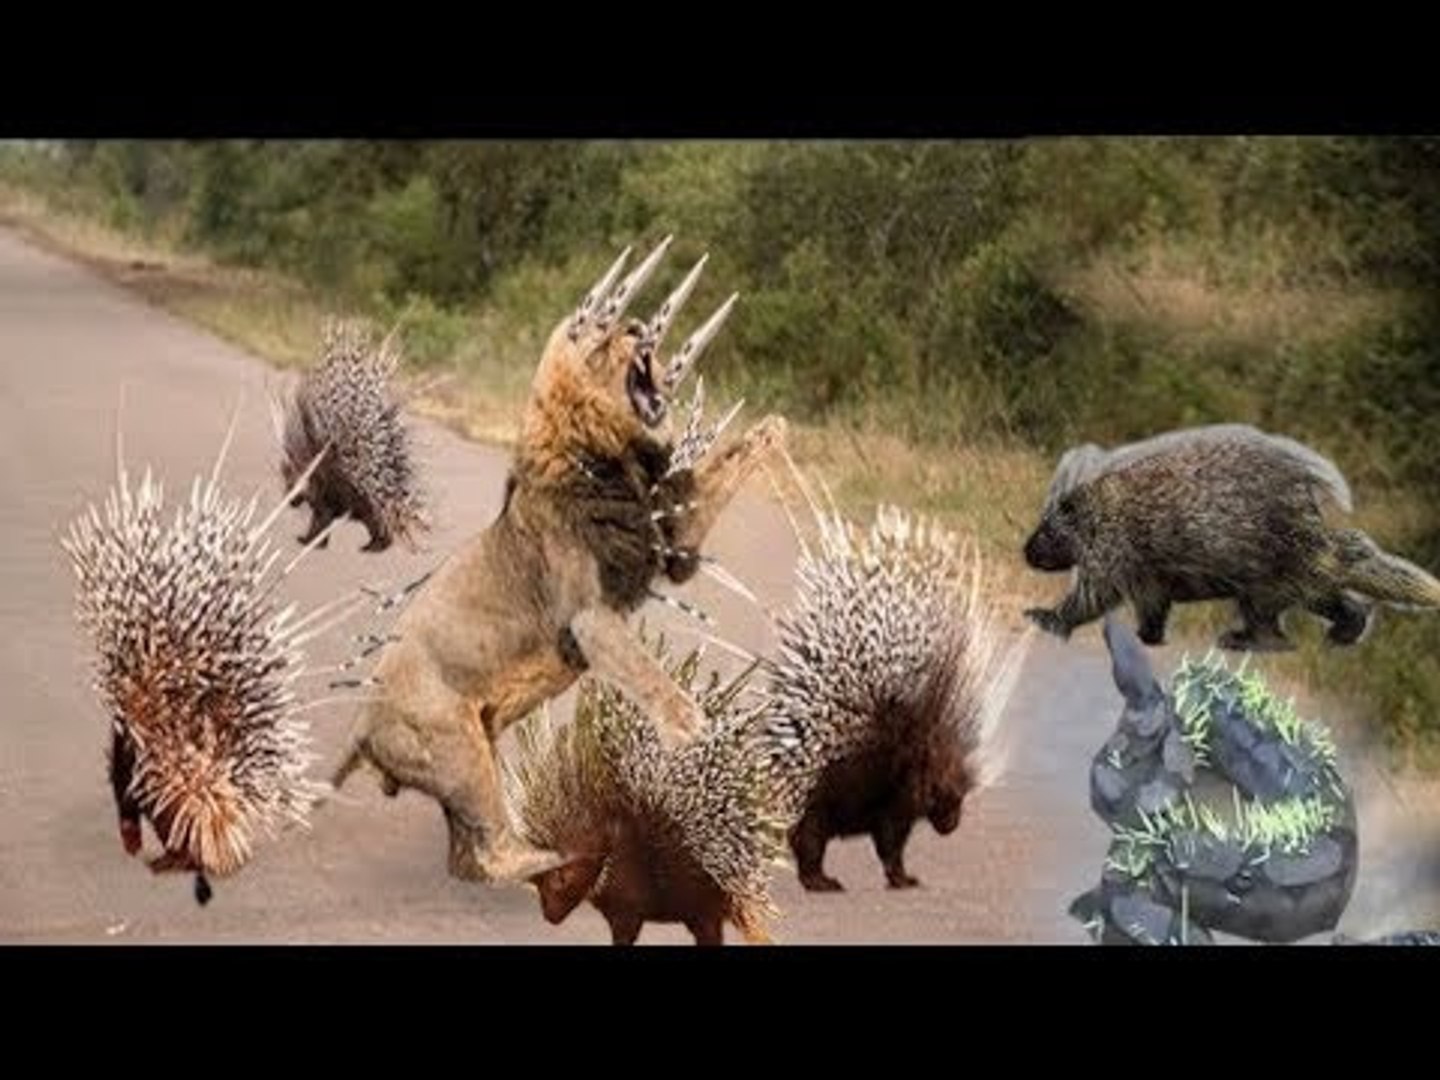 The Lion Taking The Risk Of Hunting Porcupine - Snake Defeated vs Porcupine